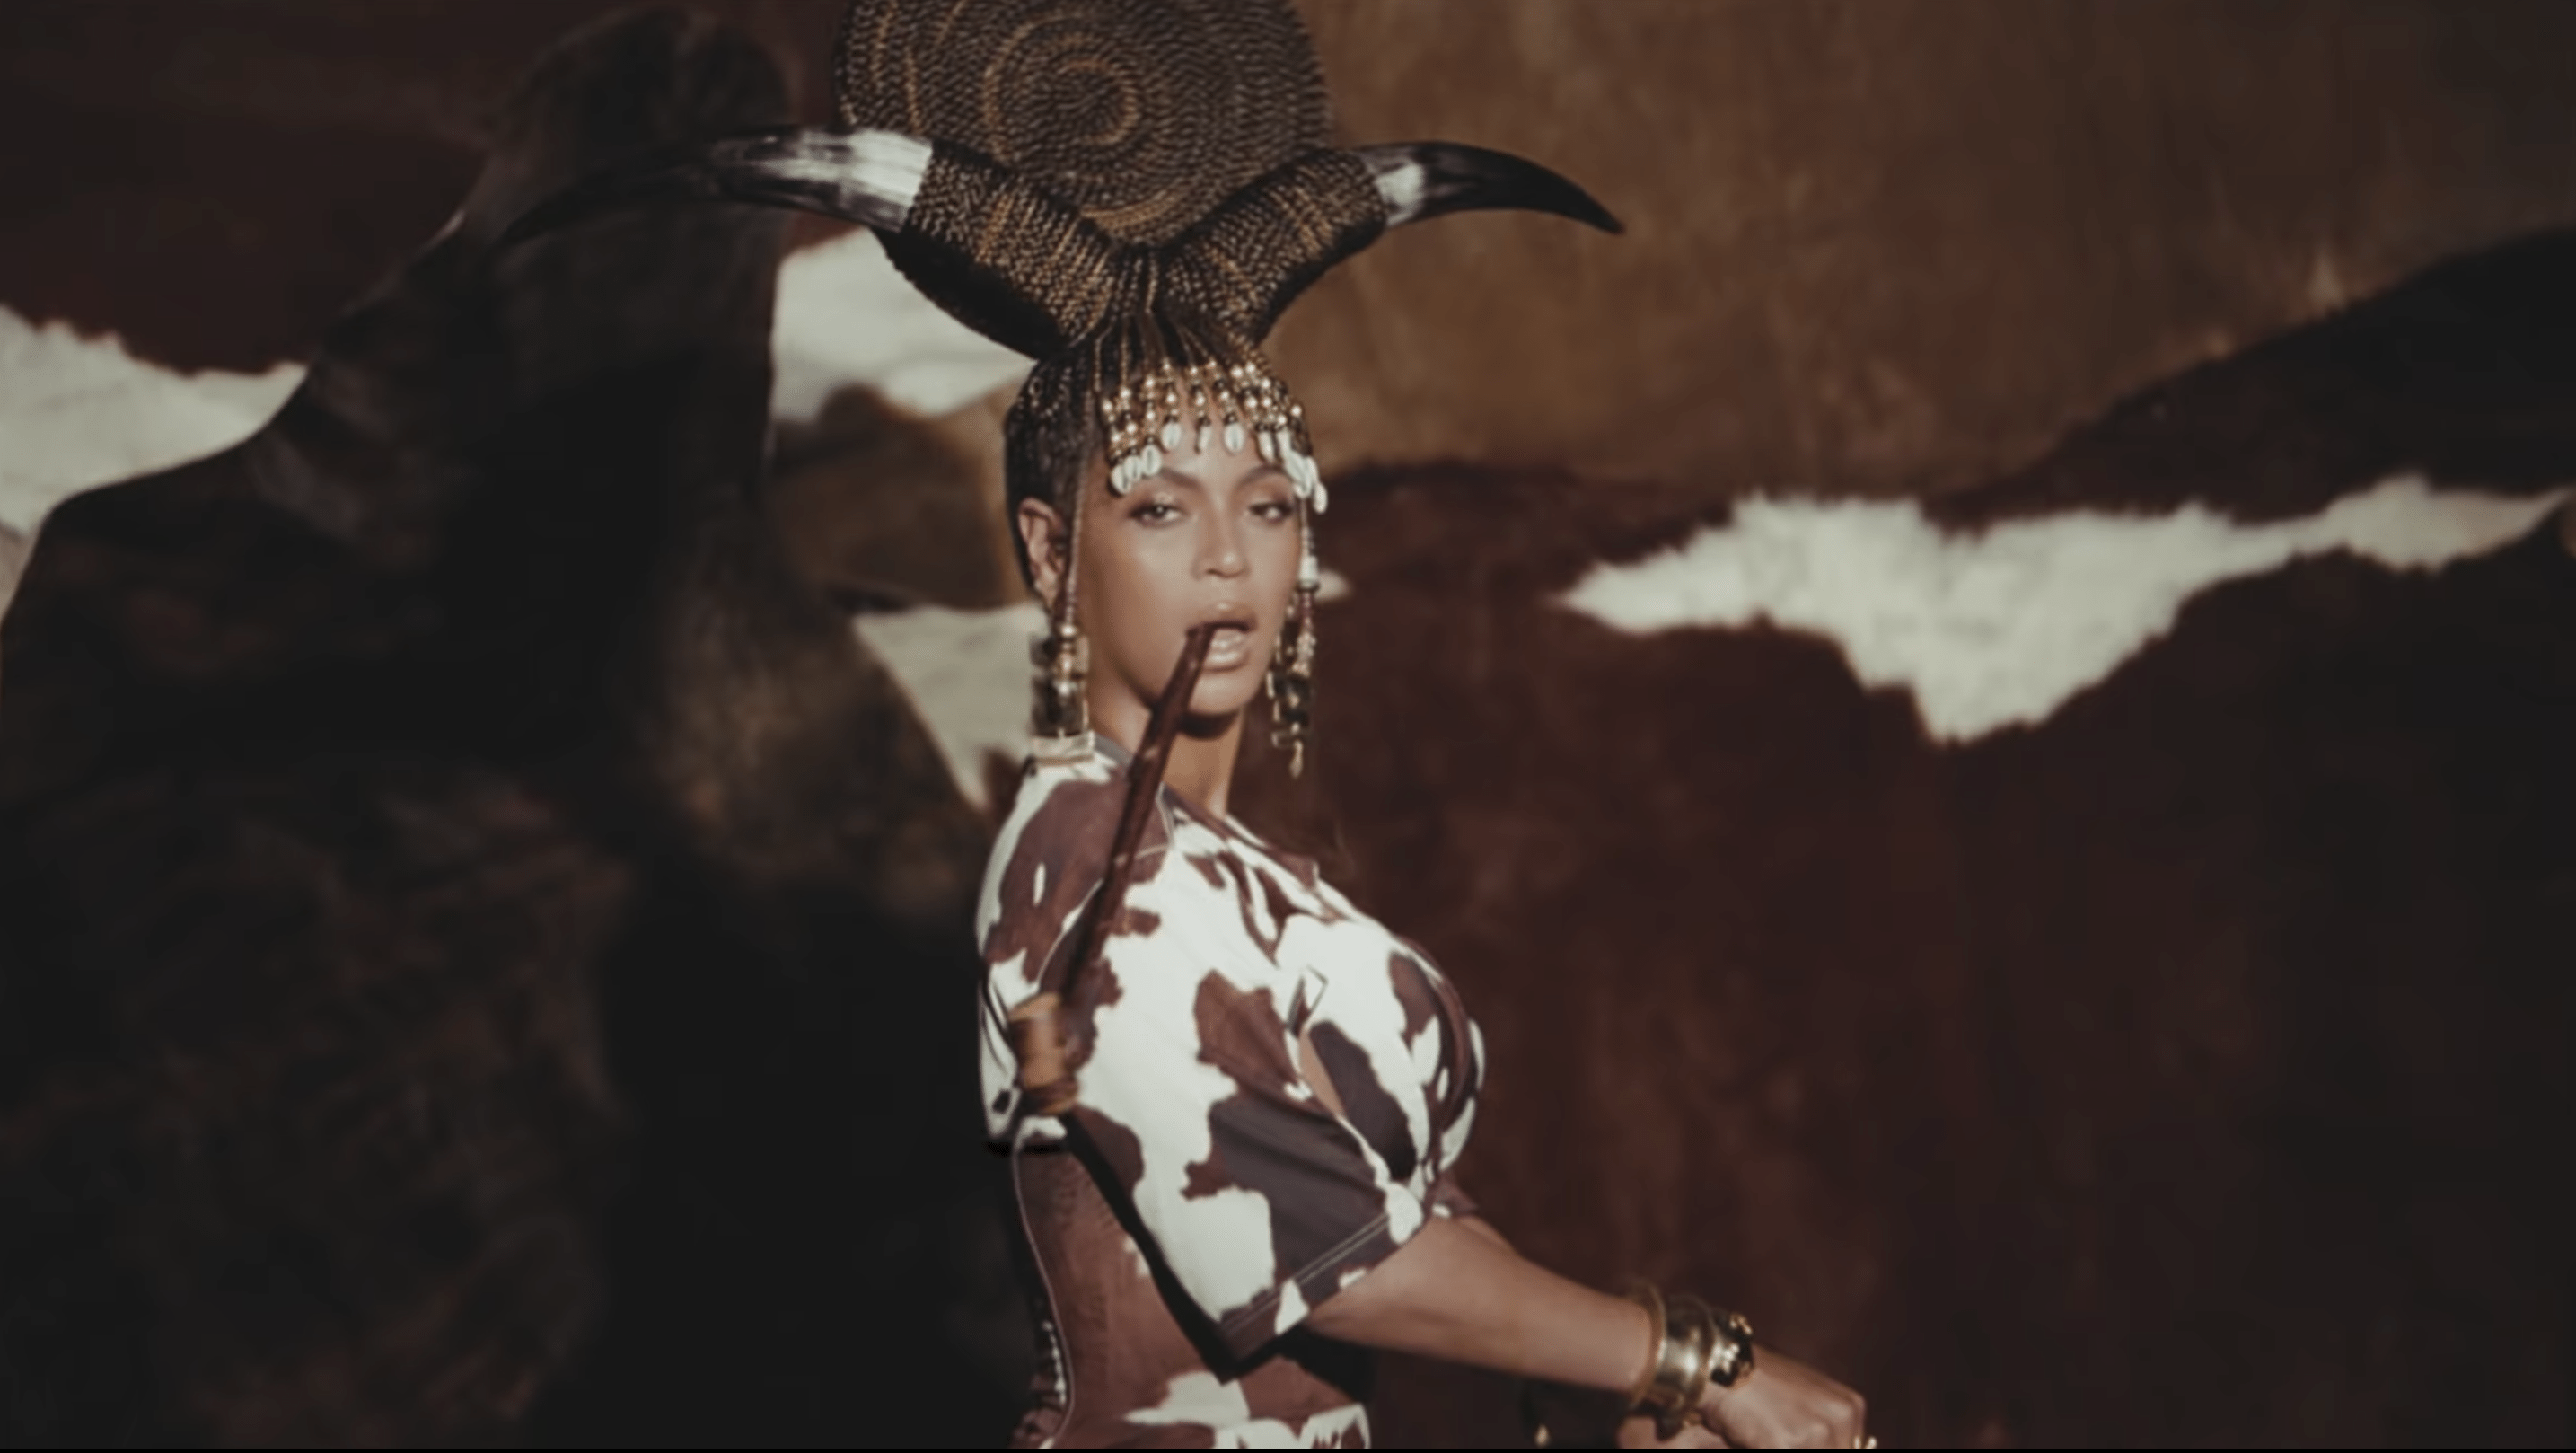 Beyoncé in a horned headdress and cow print dress in the Spirit music video - Beyonce